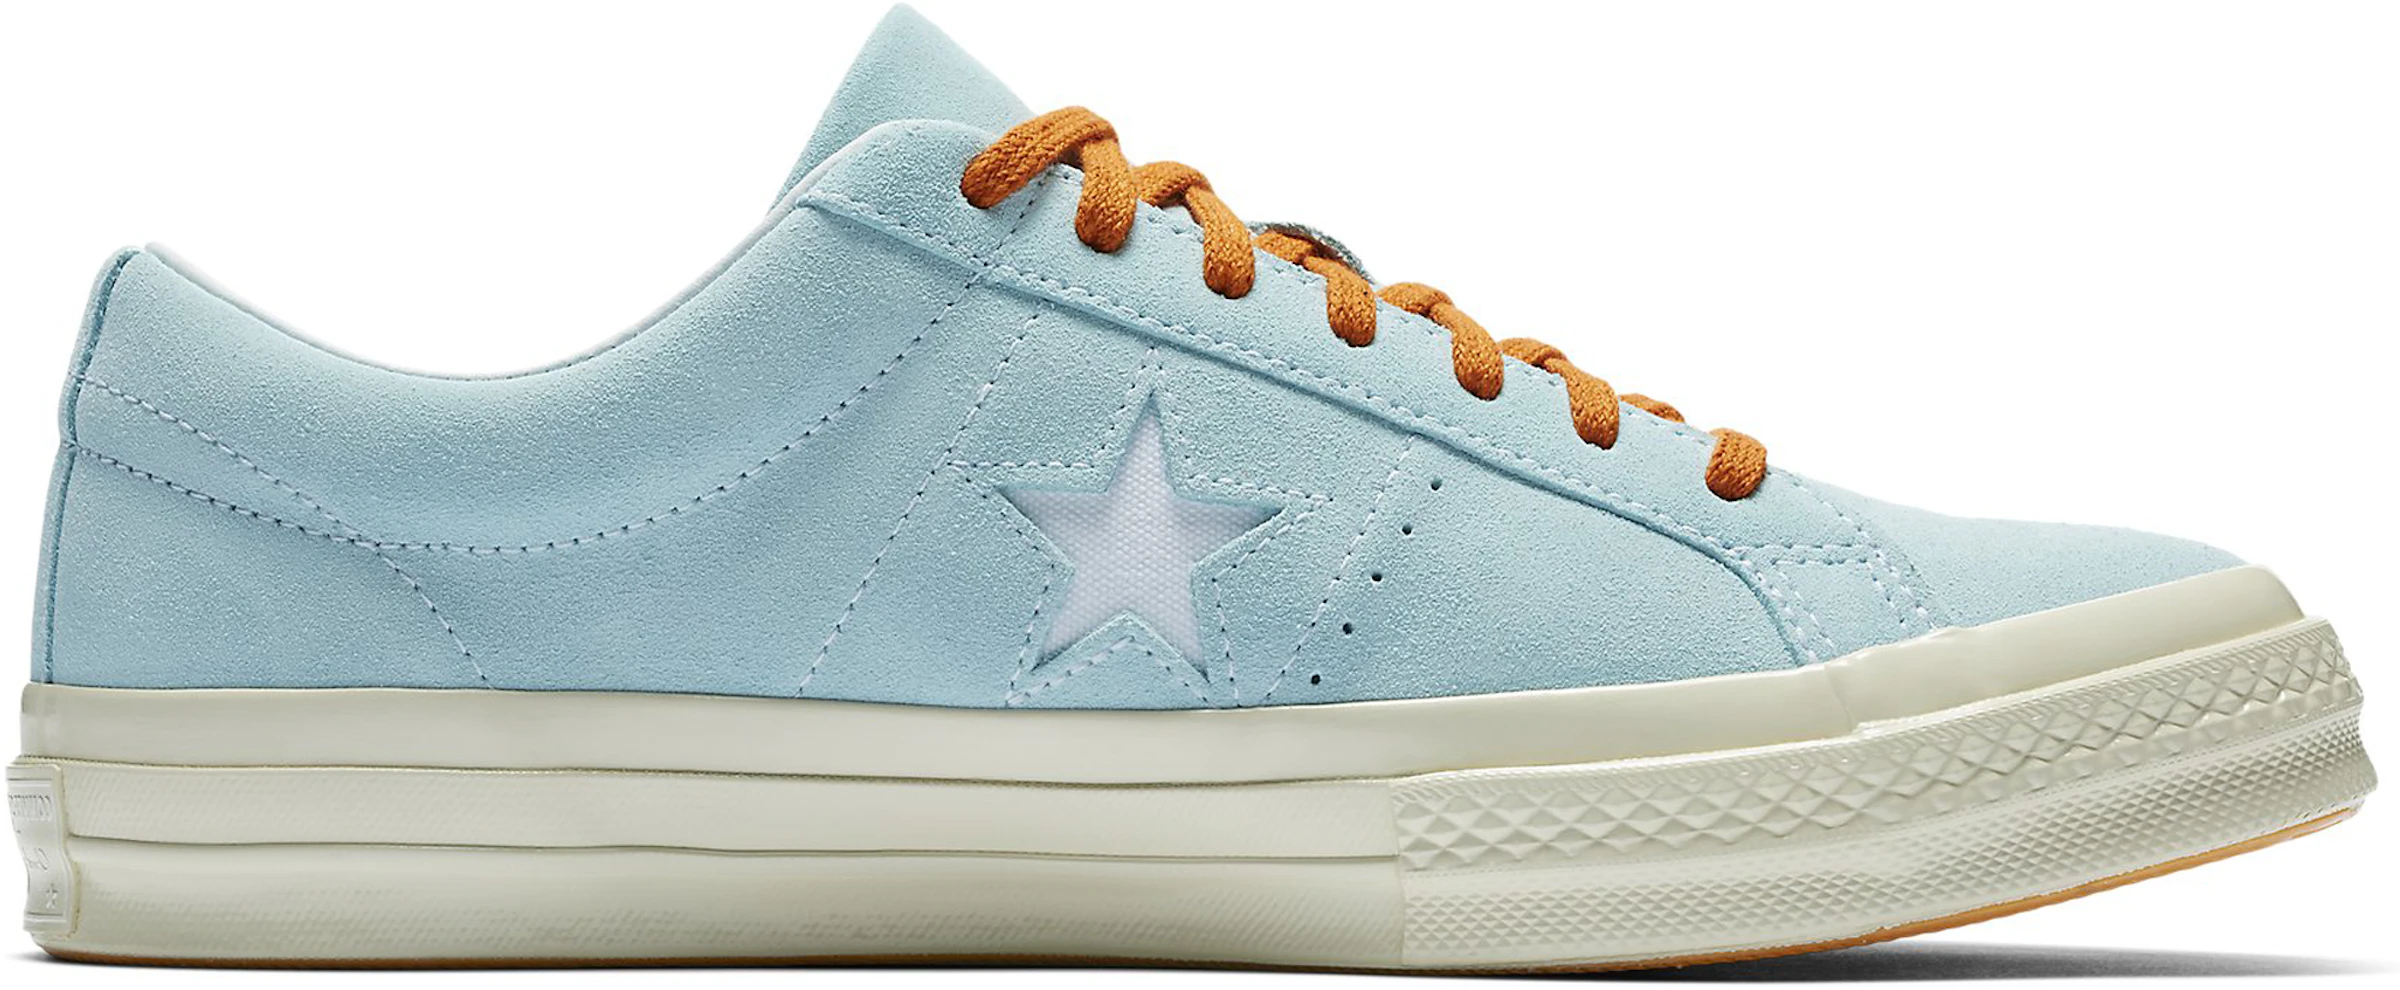 Converse One Star Ox Tyler the Creator Golf Wang Clearwater - 160111C - US